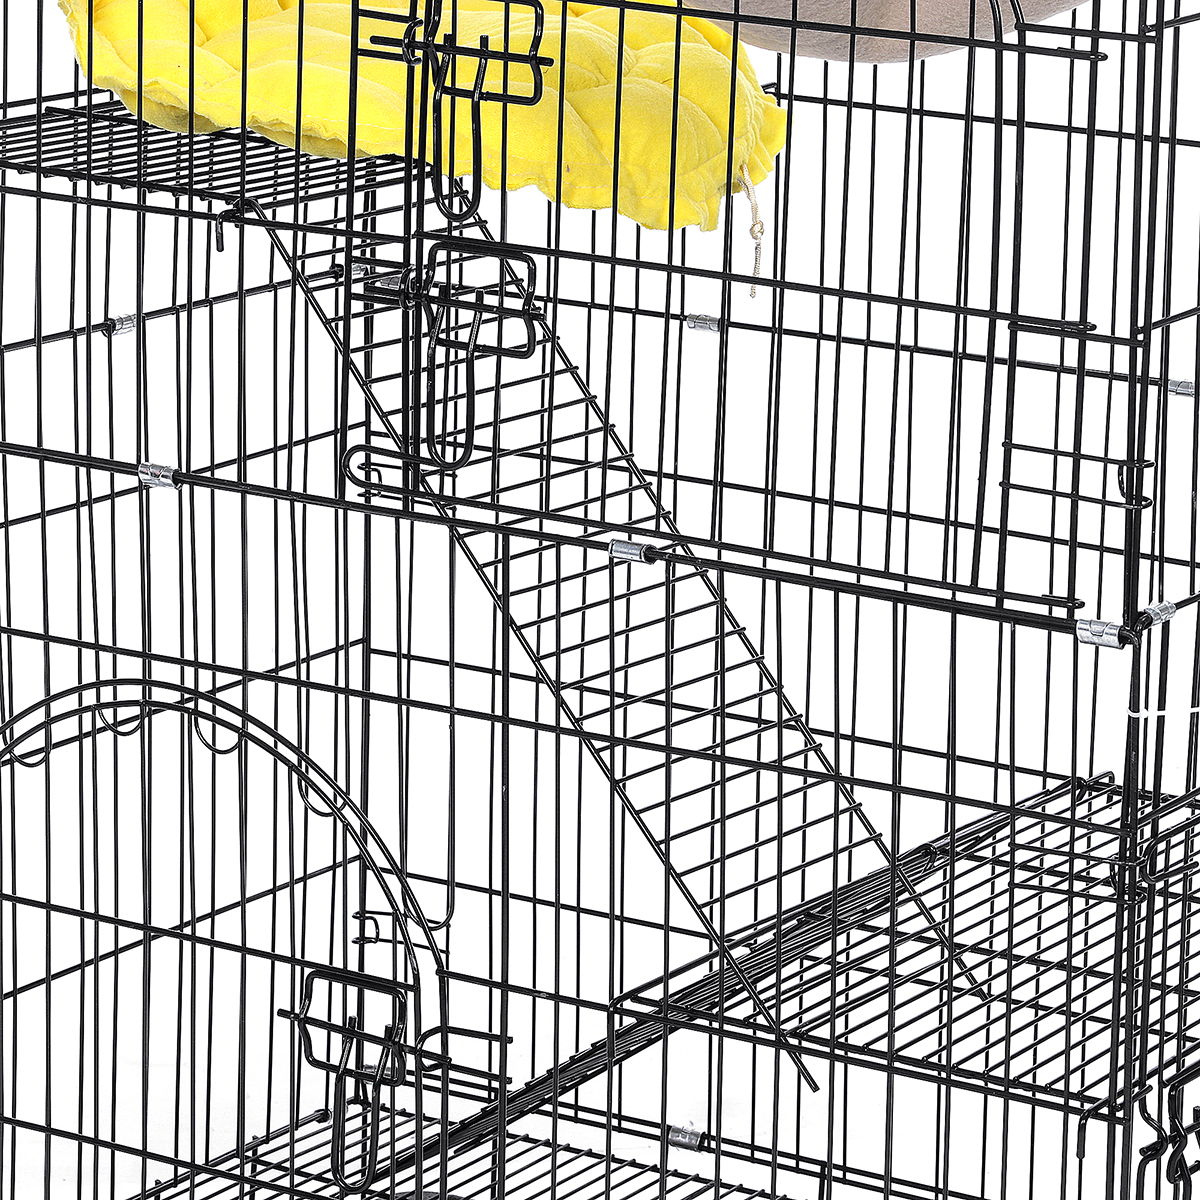 3-Tier-Cat-Cage-Cat-Playpen-Kennel-Crate-Chinchilla-Rat-Box-Cage-Enclosure-with-Ladders-Platforms-Be-1679523-12